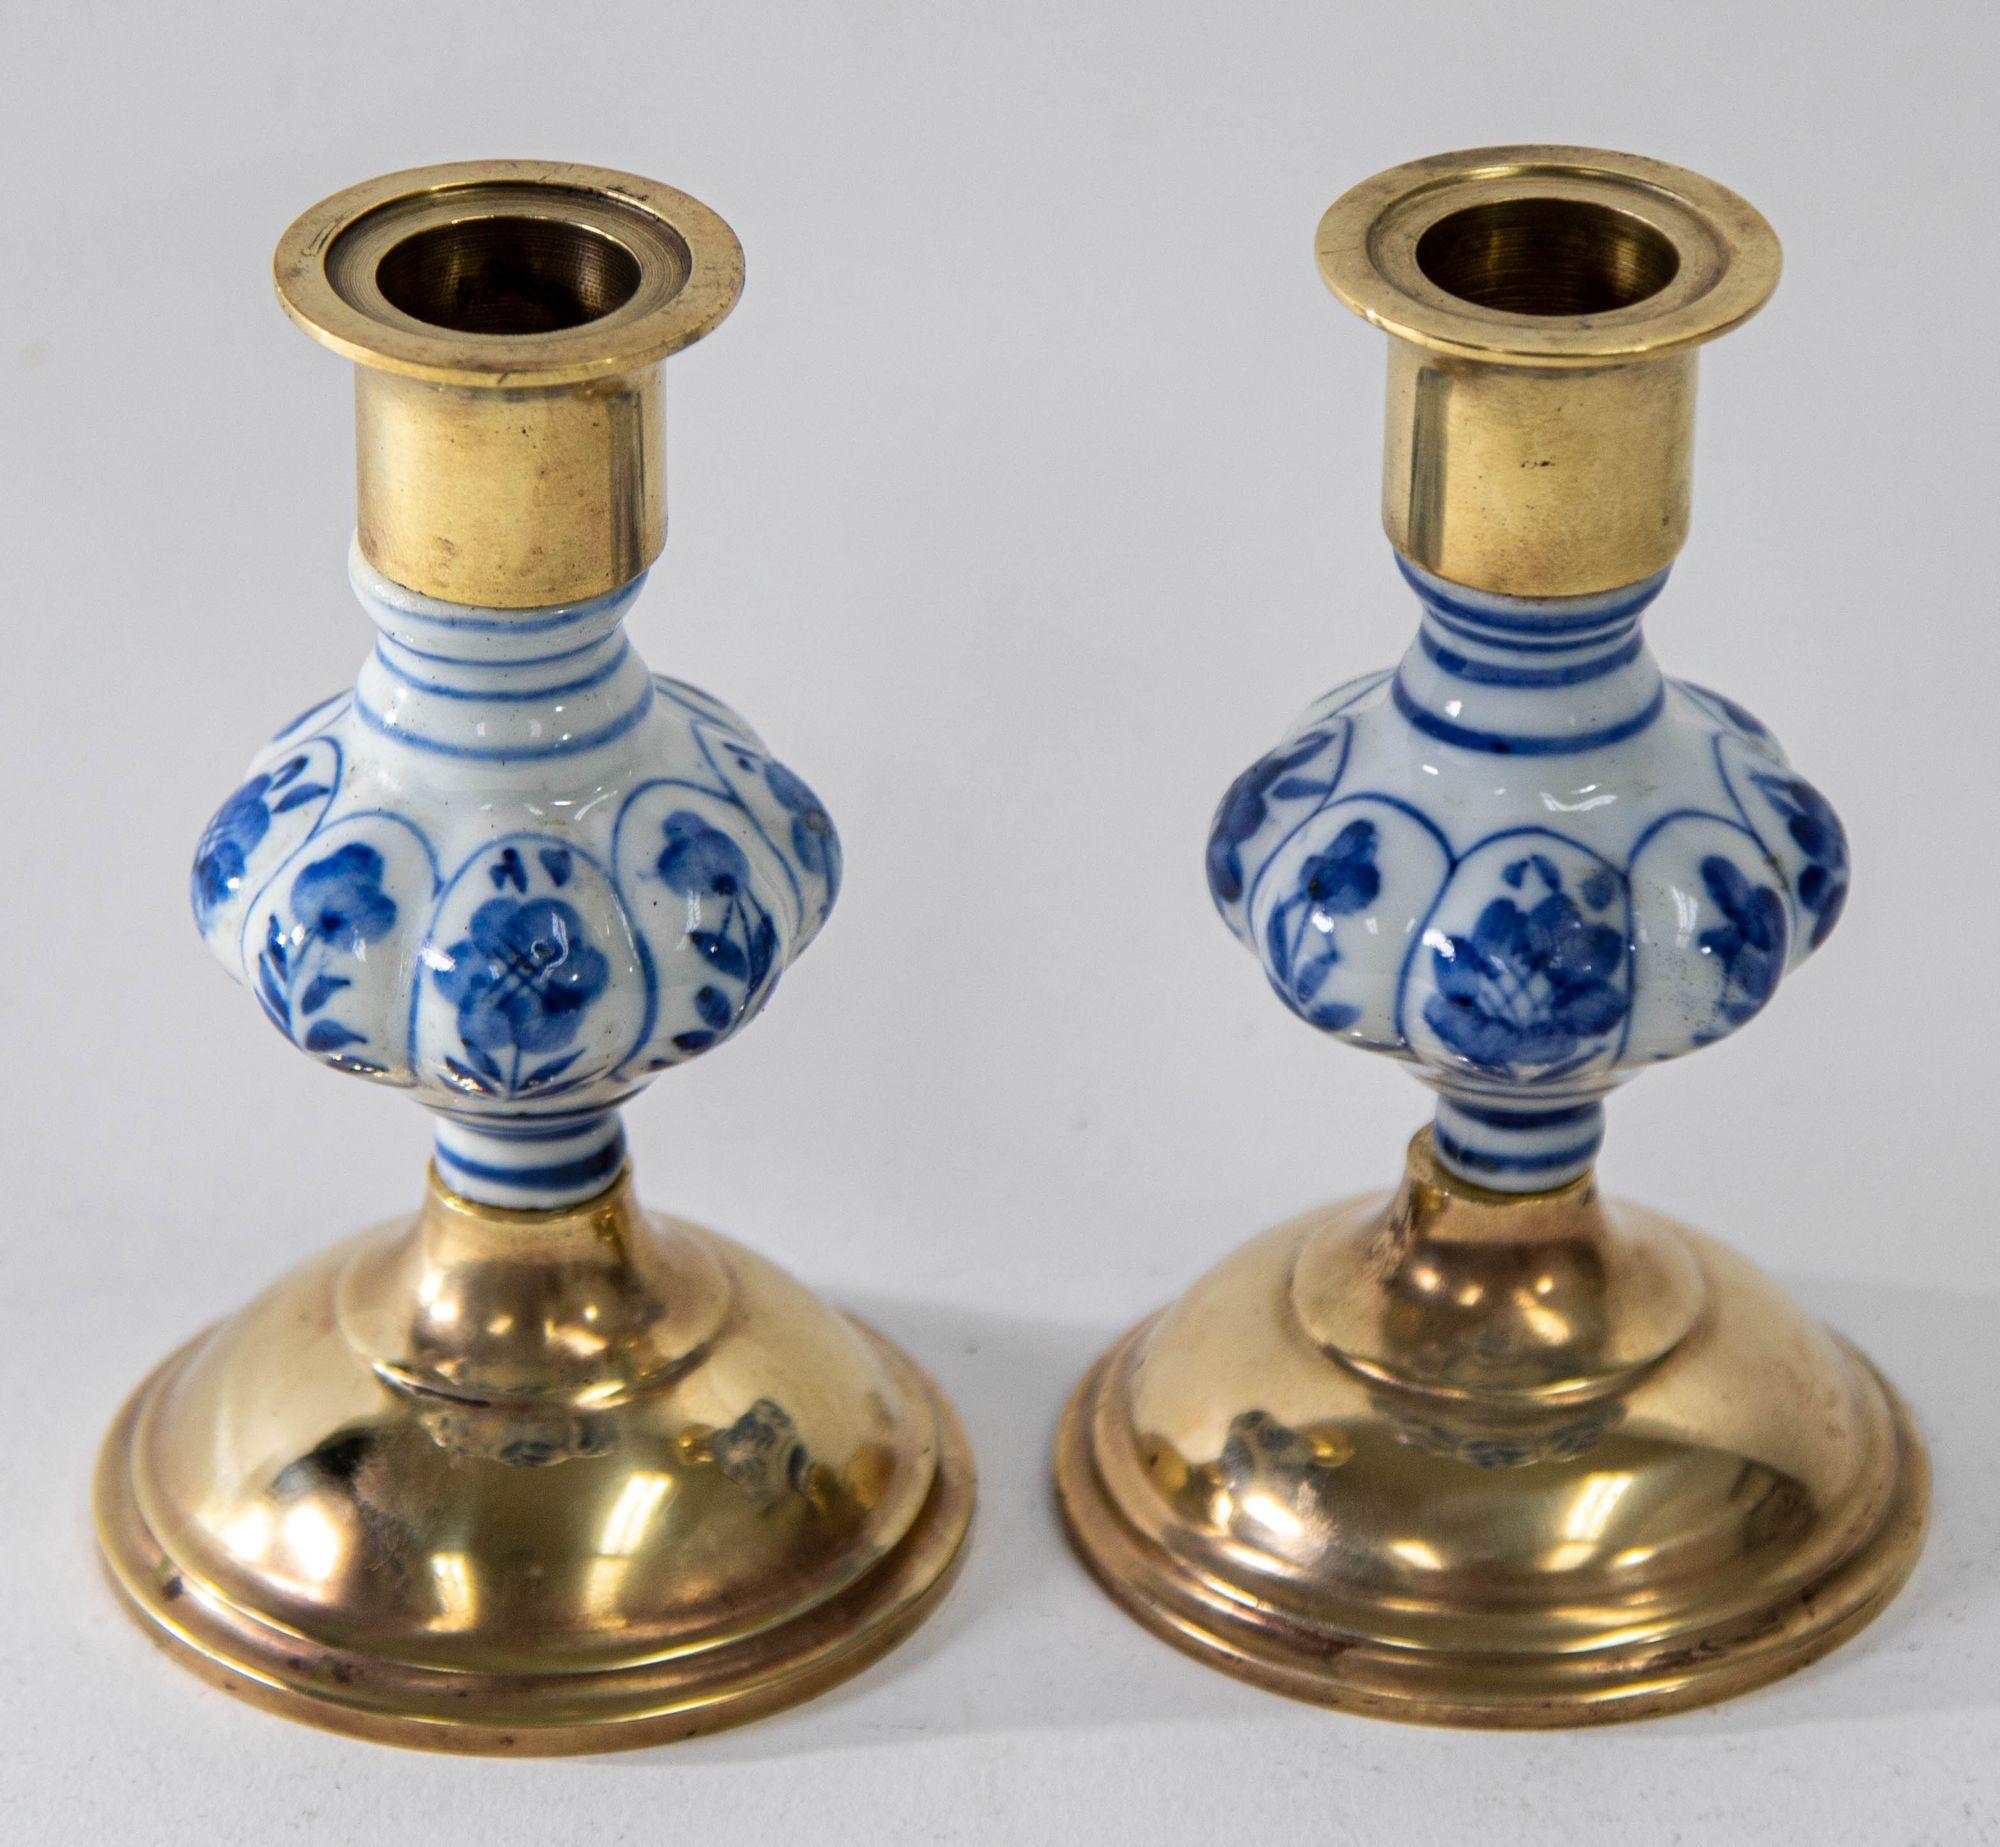 Vintage Delft Floral Blue and White Ceramic and Brass Candlesticks, a Pair 1950s For Sale 3